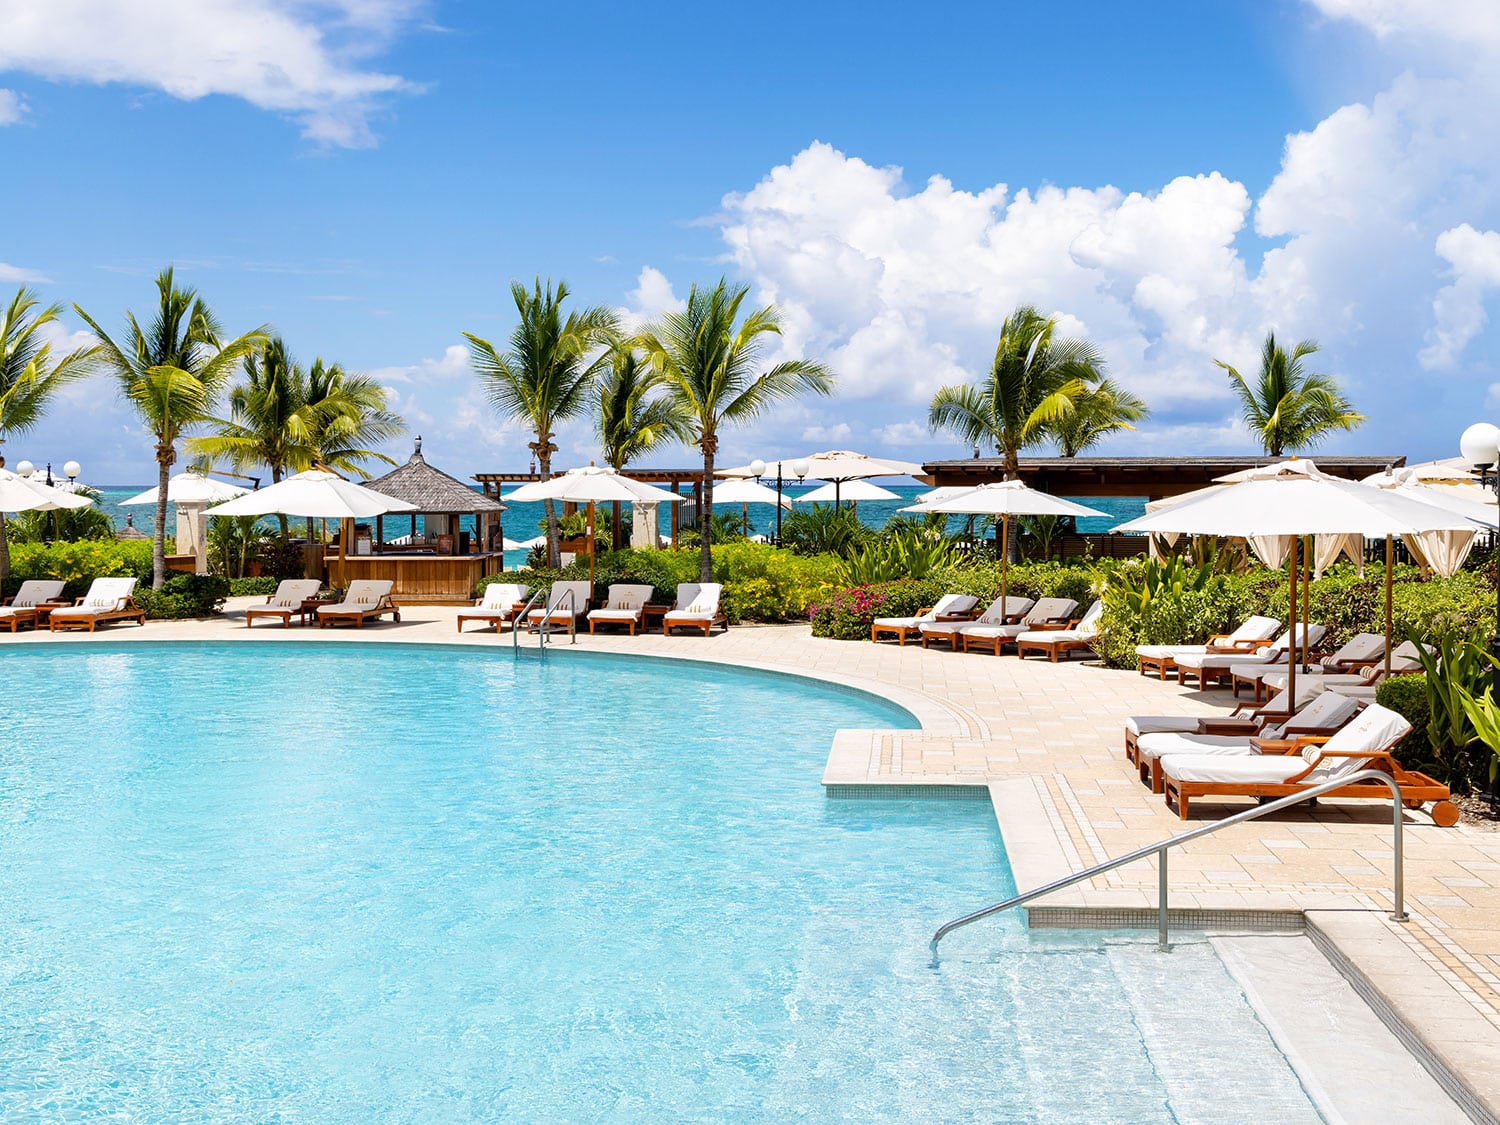 The pool at Seven Stars Resort and Spa in Turks and Caicos